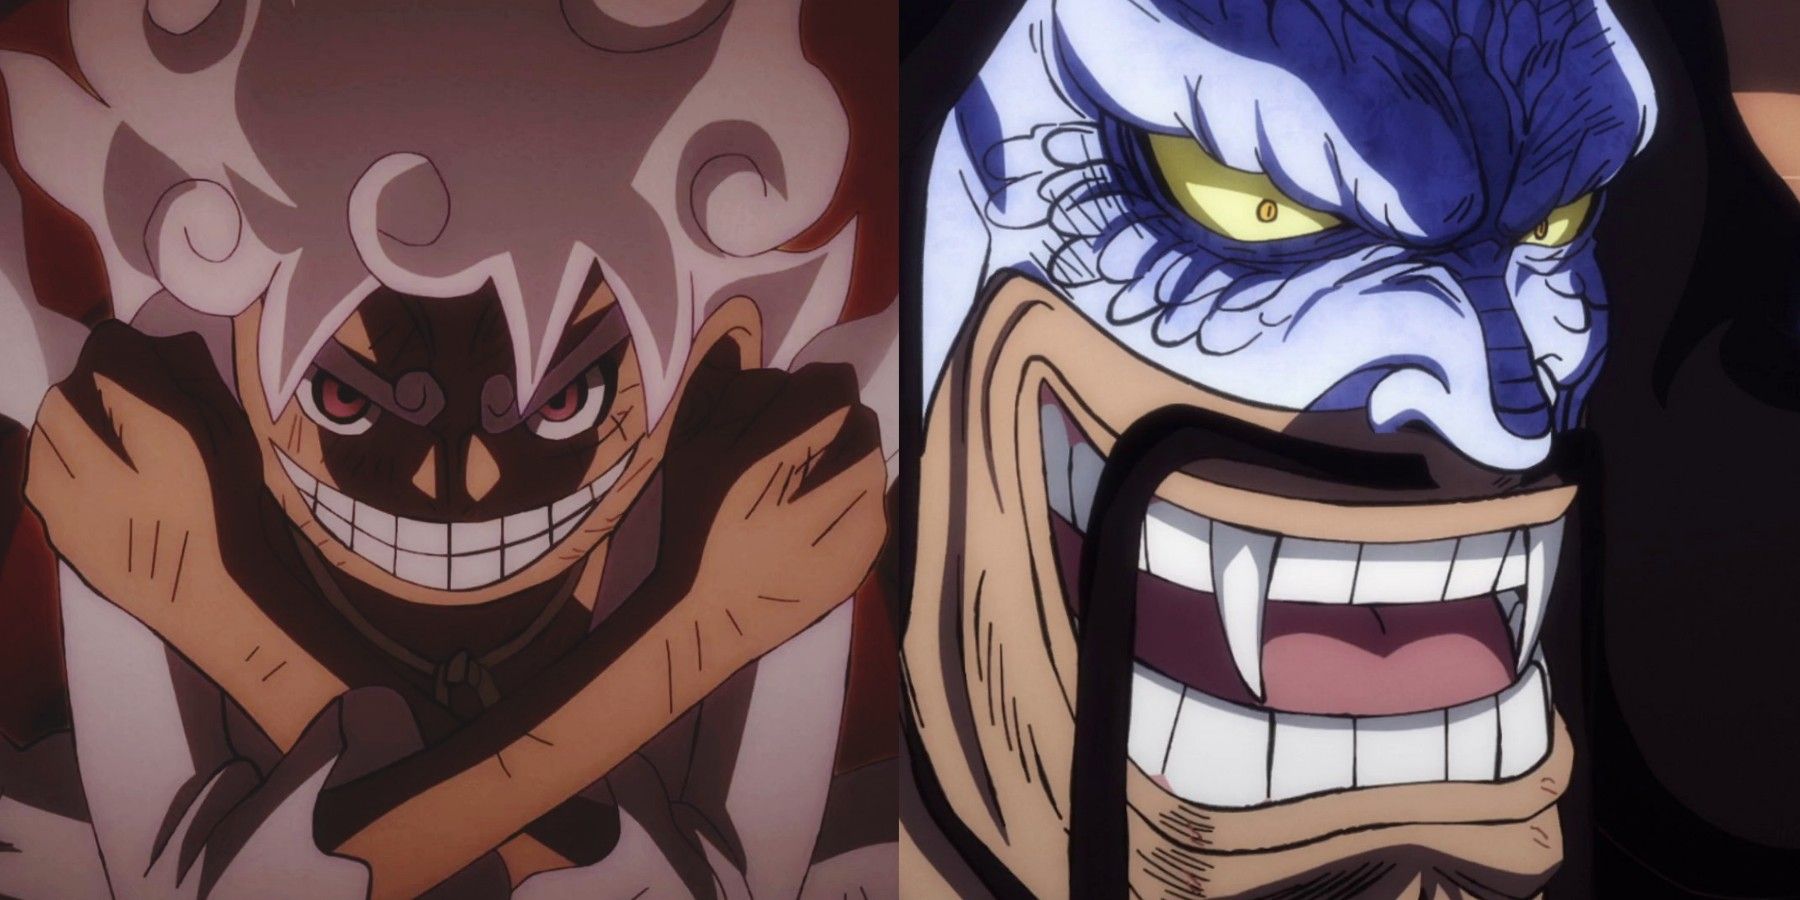 Everything you need to know about One Piece Episode 1073's release